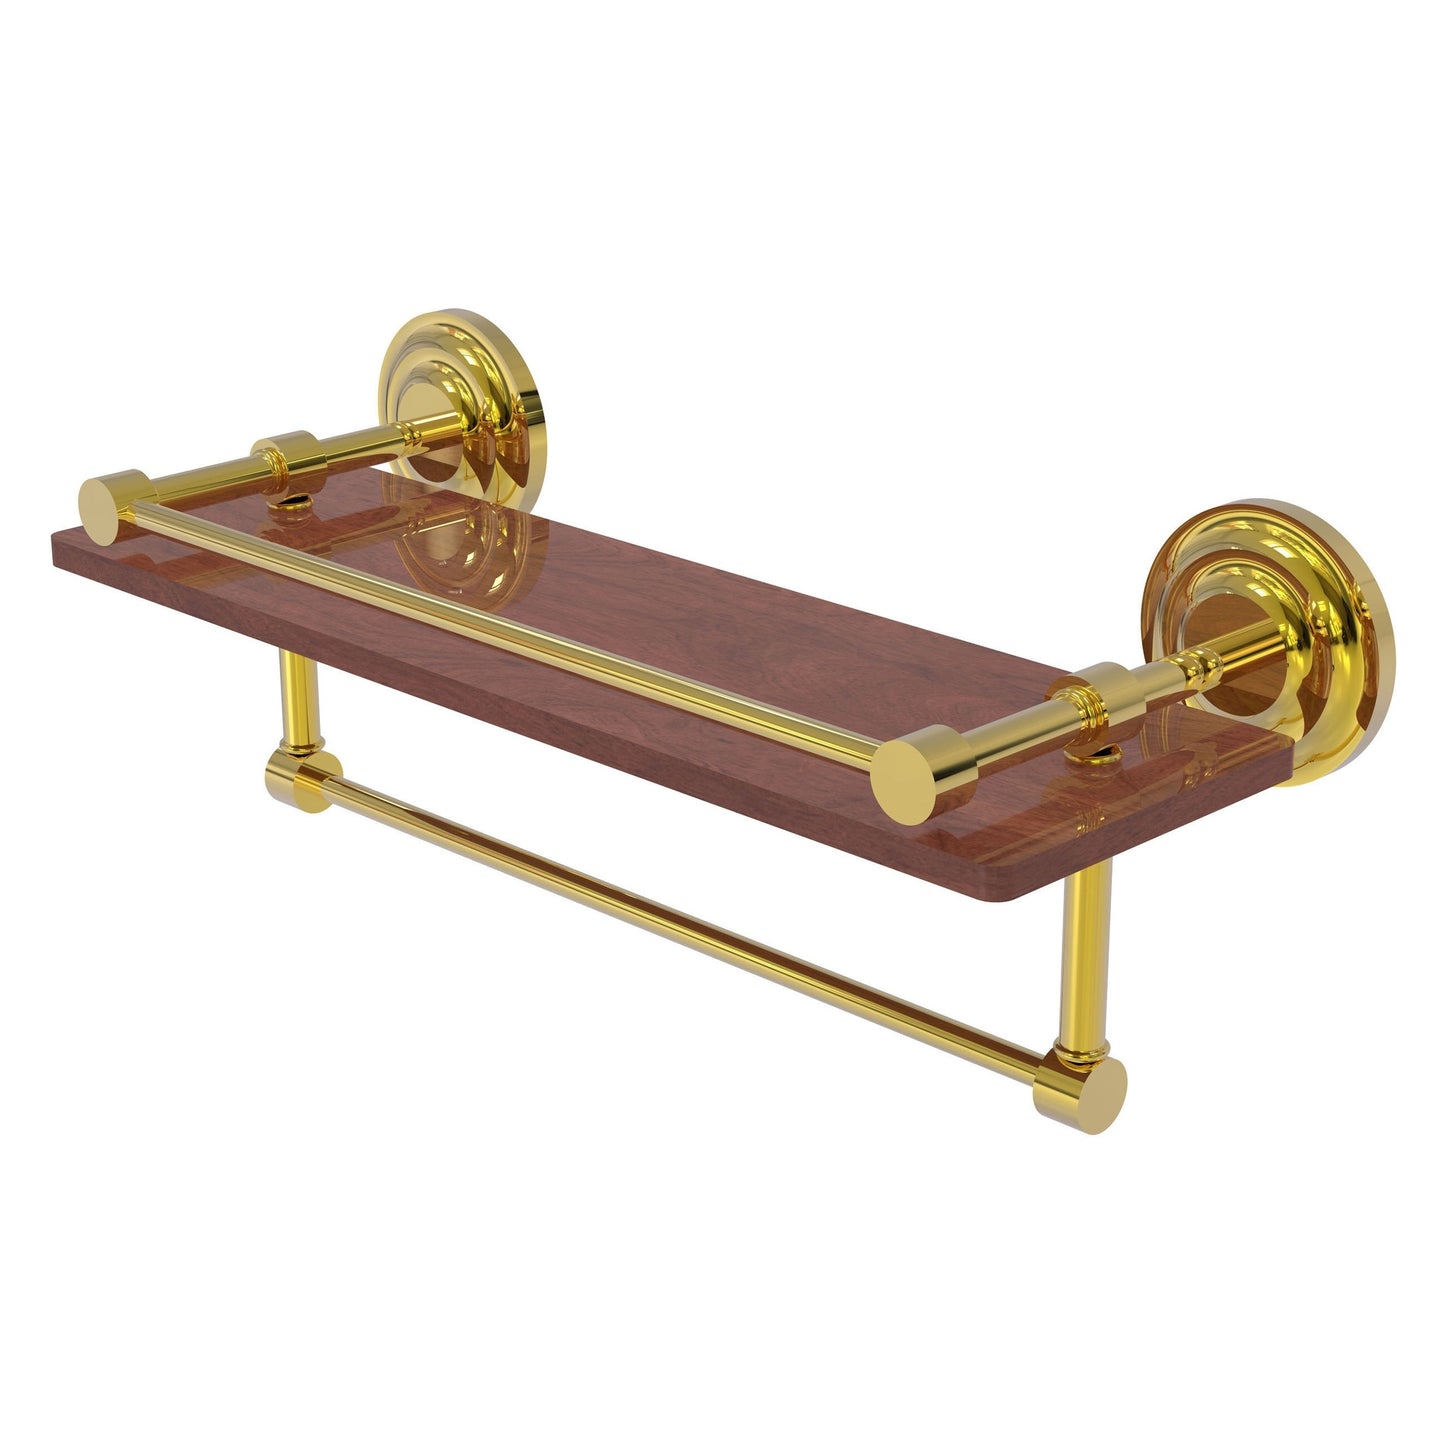 Allied Brass Que New 16" x 5" Polished Brass Solid Brass 16-Inch IPE Ironwood Shelf With Gallery Rail and Towel Bar